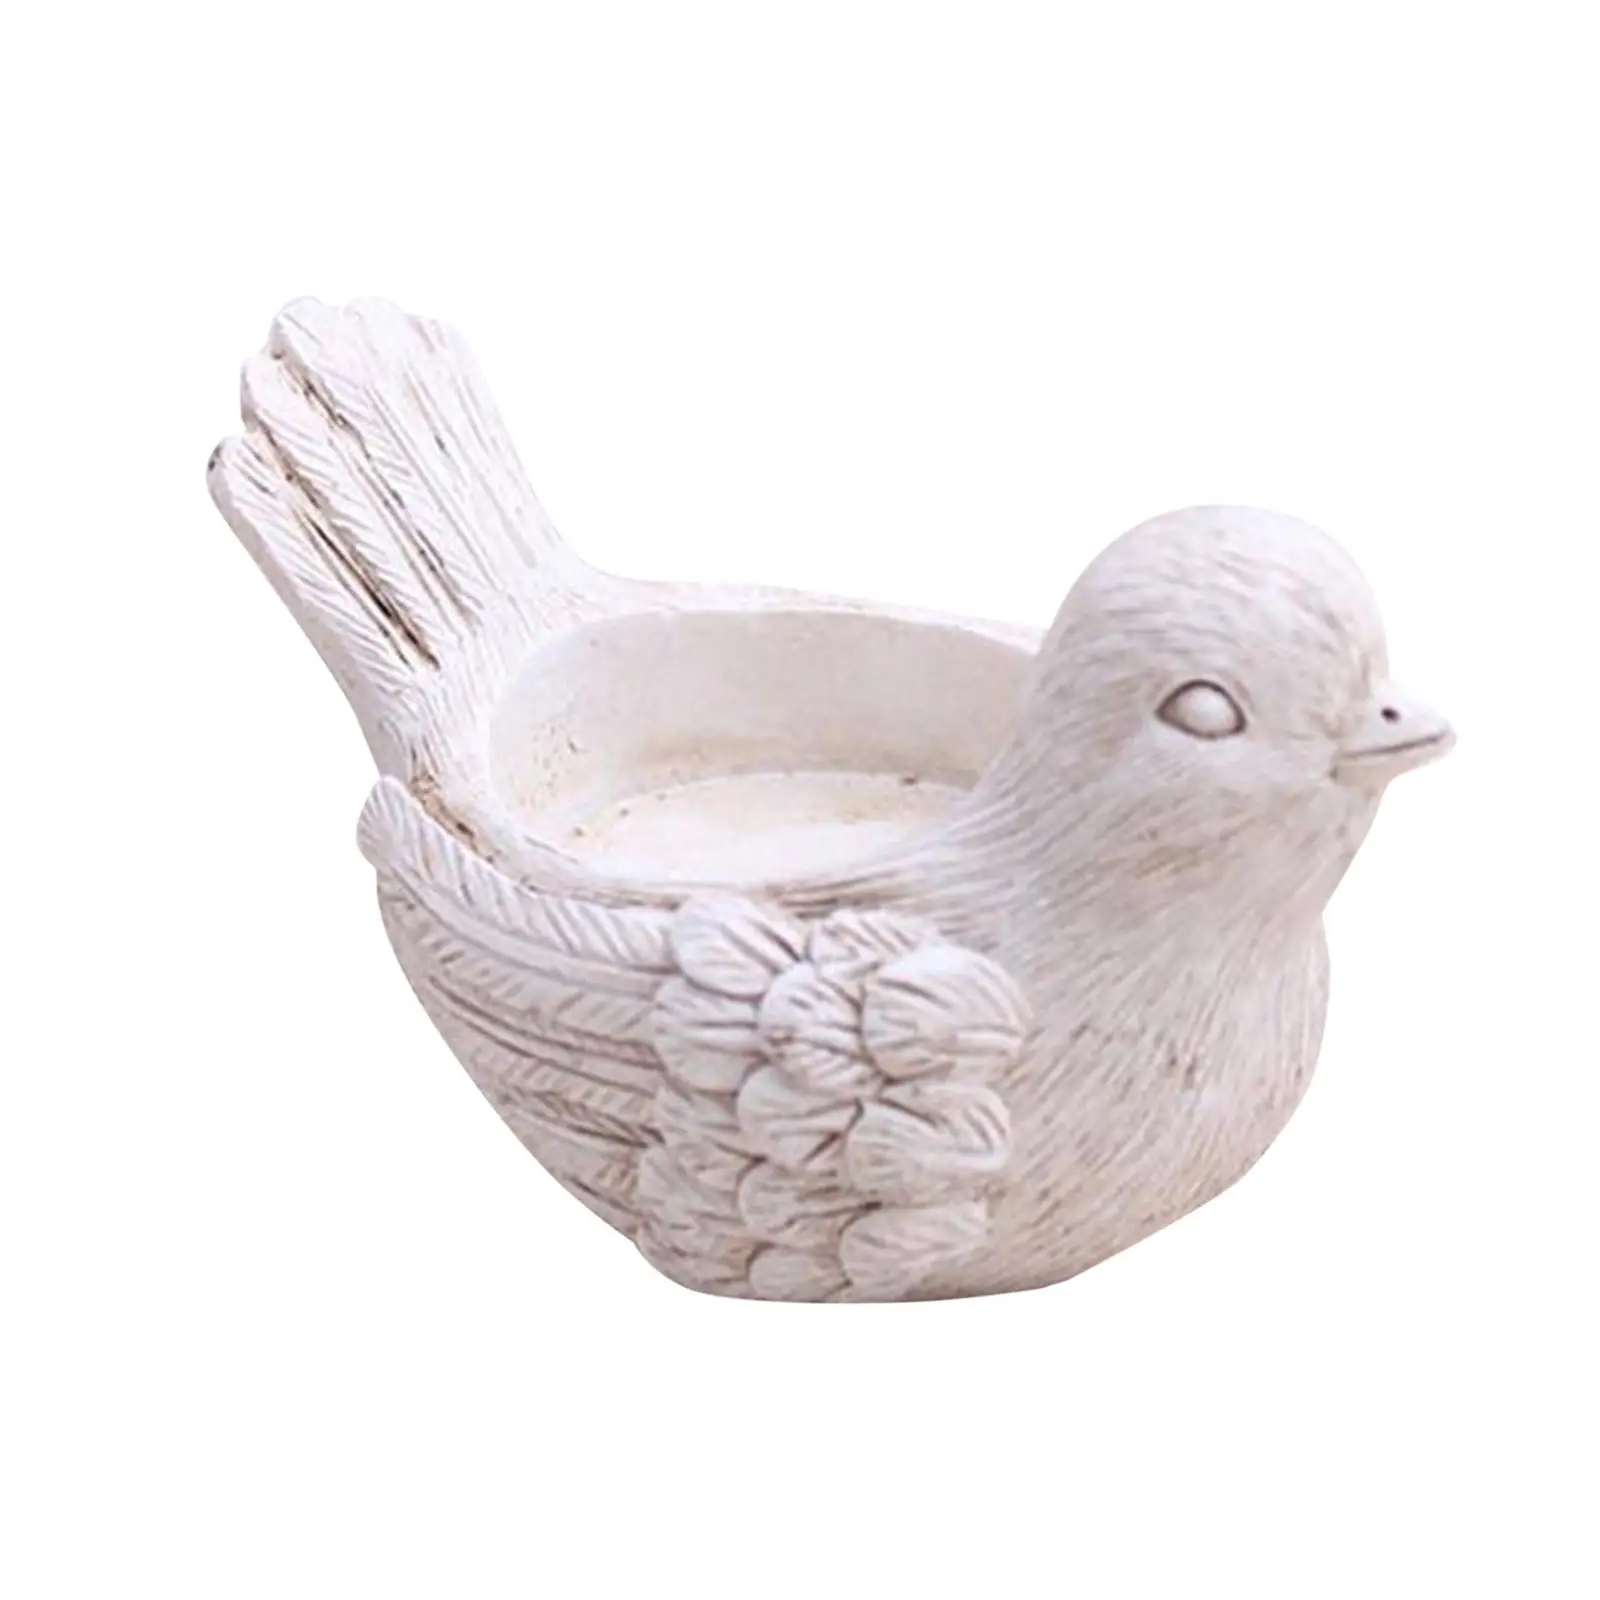 Bird Candle Holder Collectable Table Ornament for Wedding Cafe Home Decor